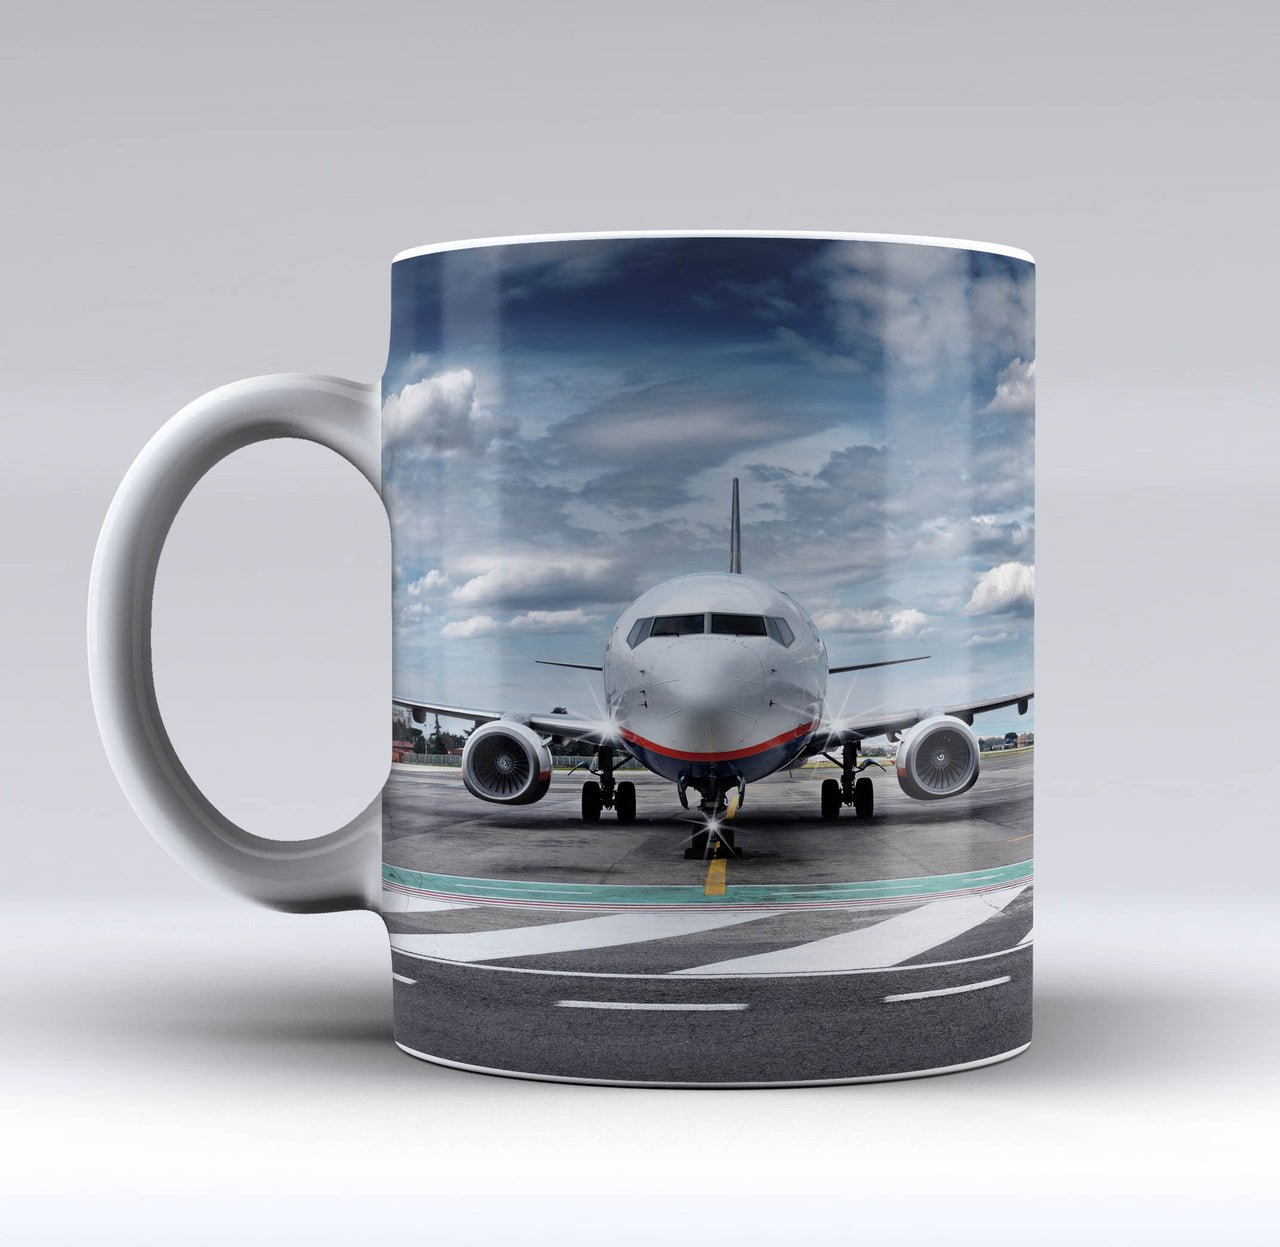 Amazing Clouds and Boeing 737 NG Designed Mugs